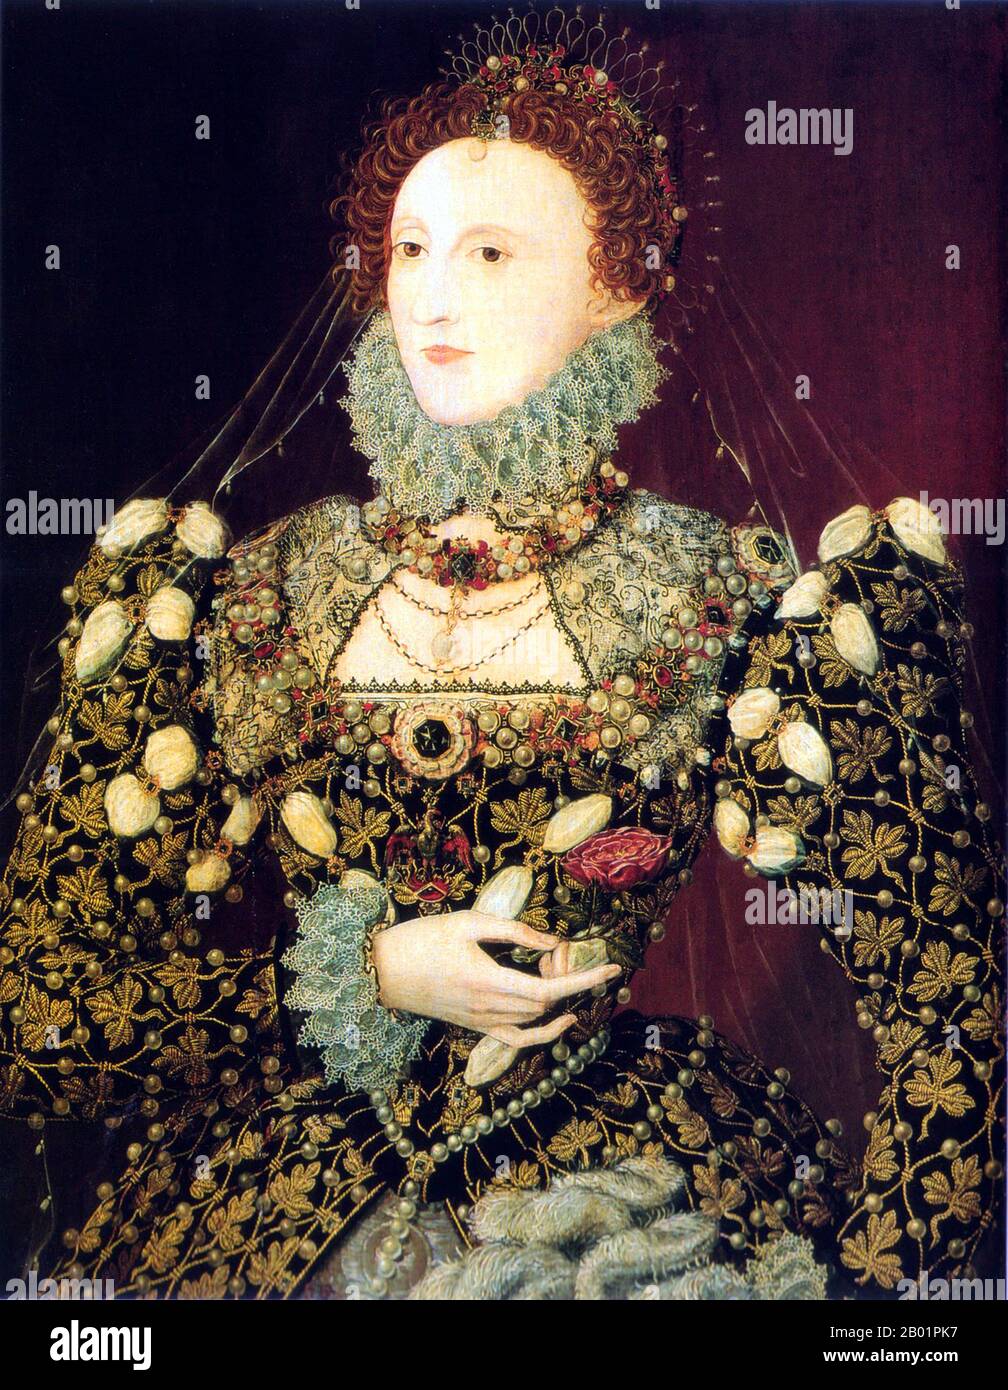 England: Queen Elizabeth I (7 September 1533 - 24 March 1603), represented in the 'Phoenix' portrait. Oil on panel painting attributed to Nicholas Hilliard, (c. 1547 - 7 January 1619) c. 1575.  Elizabeth I was Queen regnant of England and Queen regnant of Ireland from 17 November 1558 until her death. Sometimes called The Virgin Queen, Gloriana, or Good Queen Bess, Elizabeth was the fifth and last monarch of the Tudor dynasty. Elizabeth I's foreign policy with regard to Asia, Africa and Latin America demonstrated a new understanding of the role of England as a maritime, Protestant power. Stock Photo